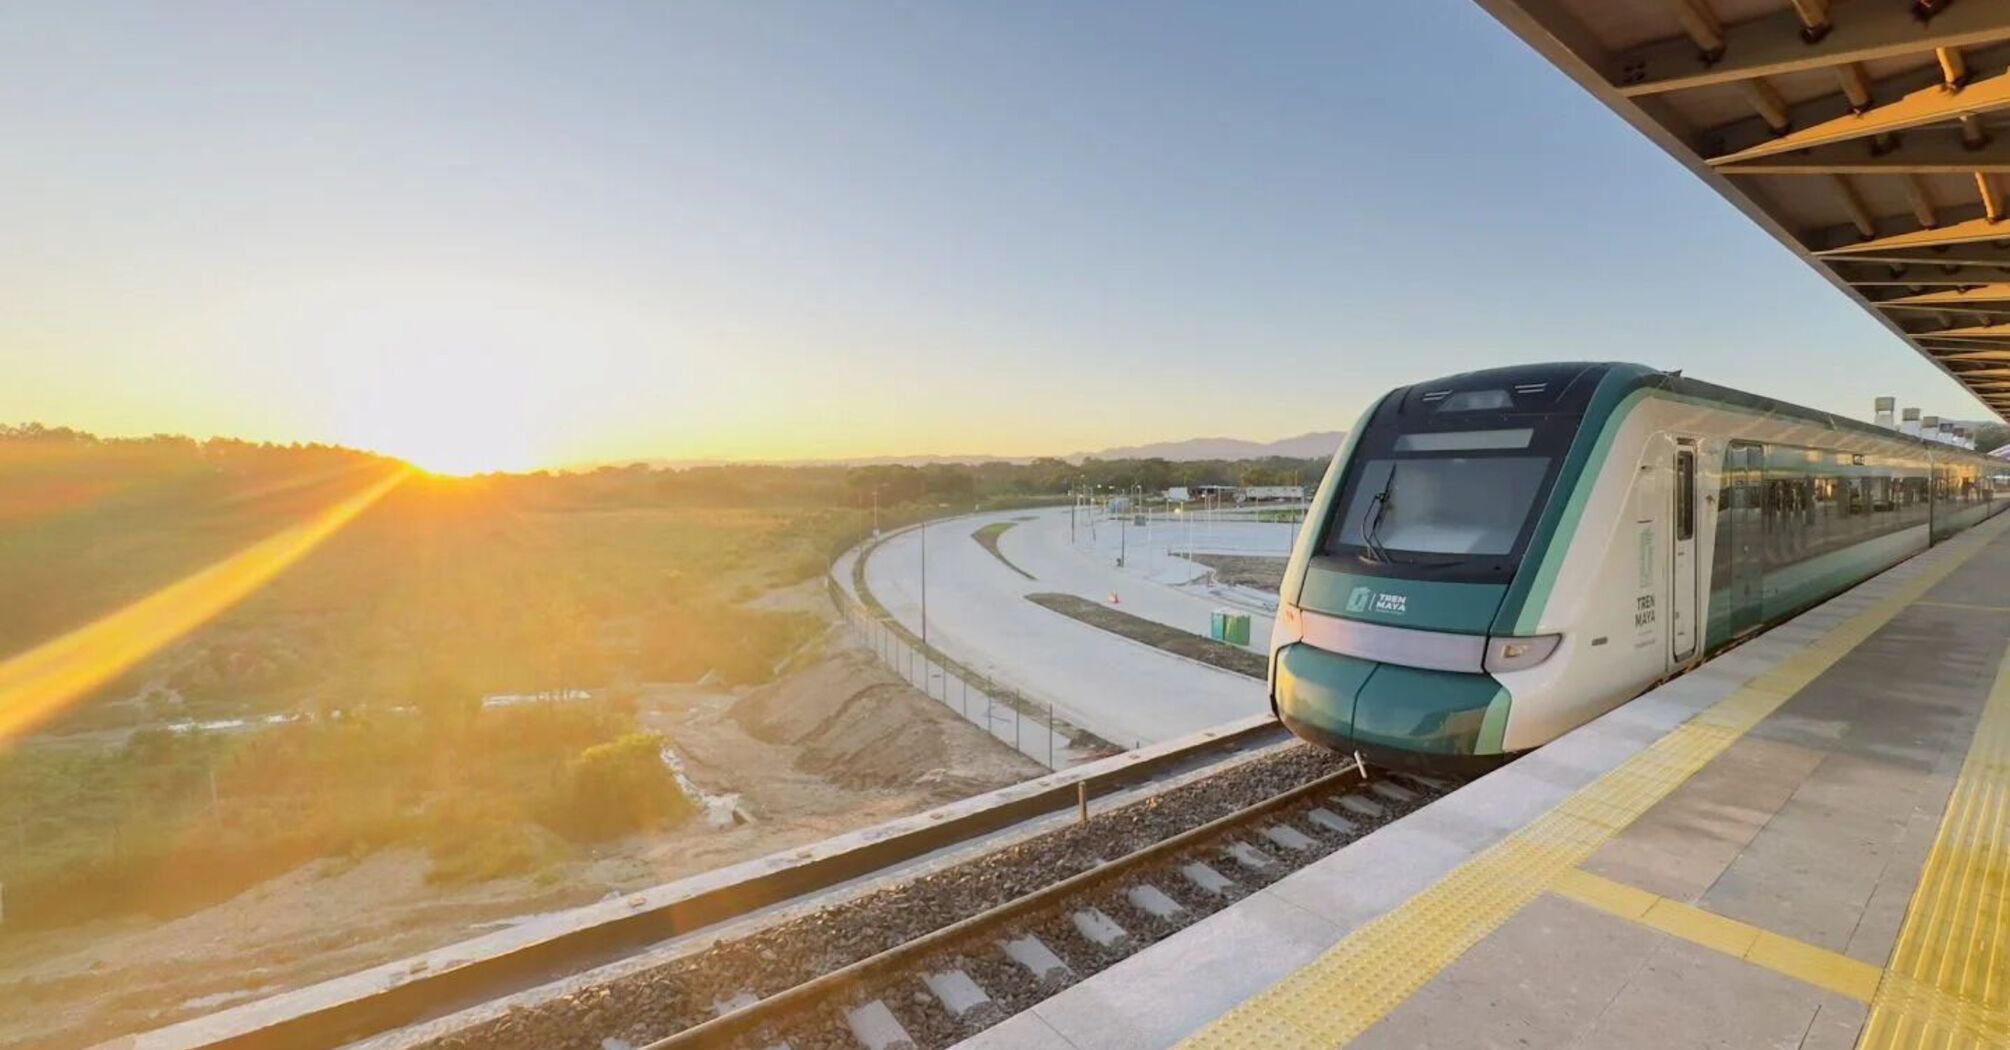 These are the gates to the nature and cultural heritage of the region: Mexico officially opened the first section of El Tren Maya